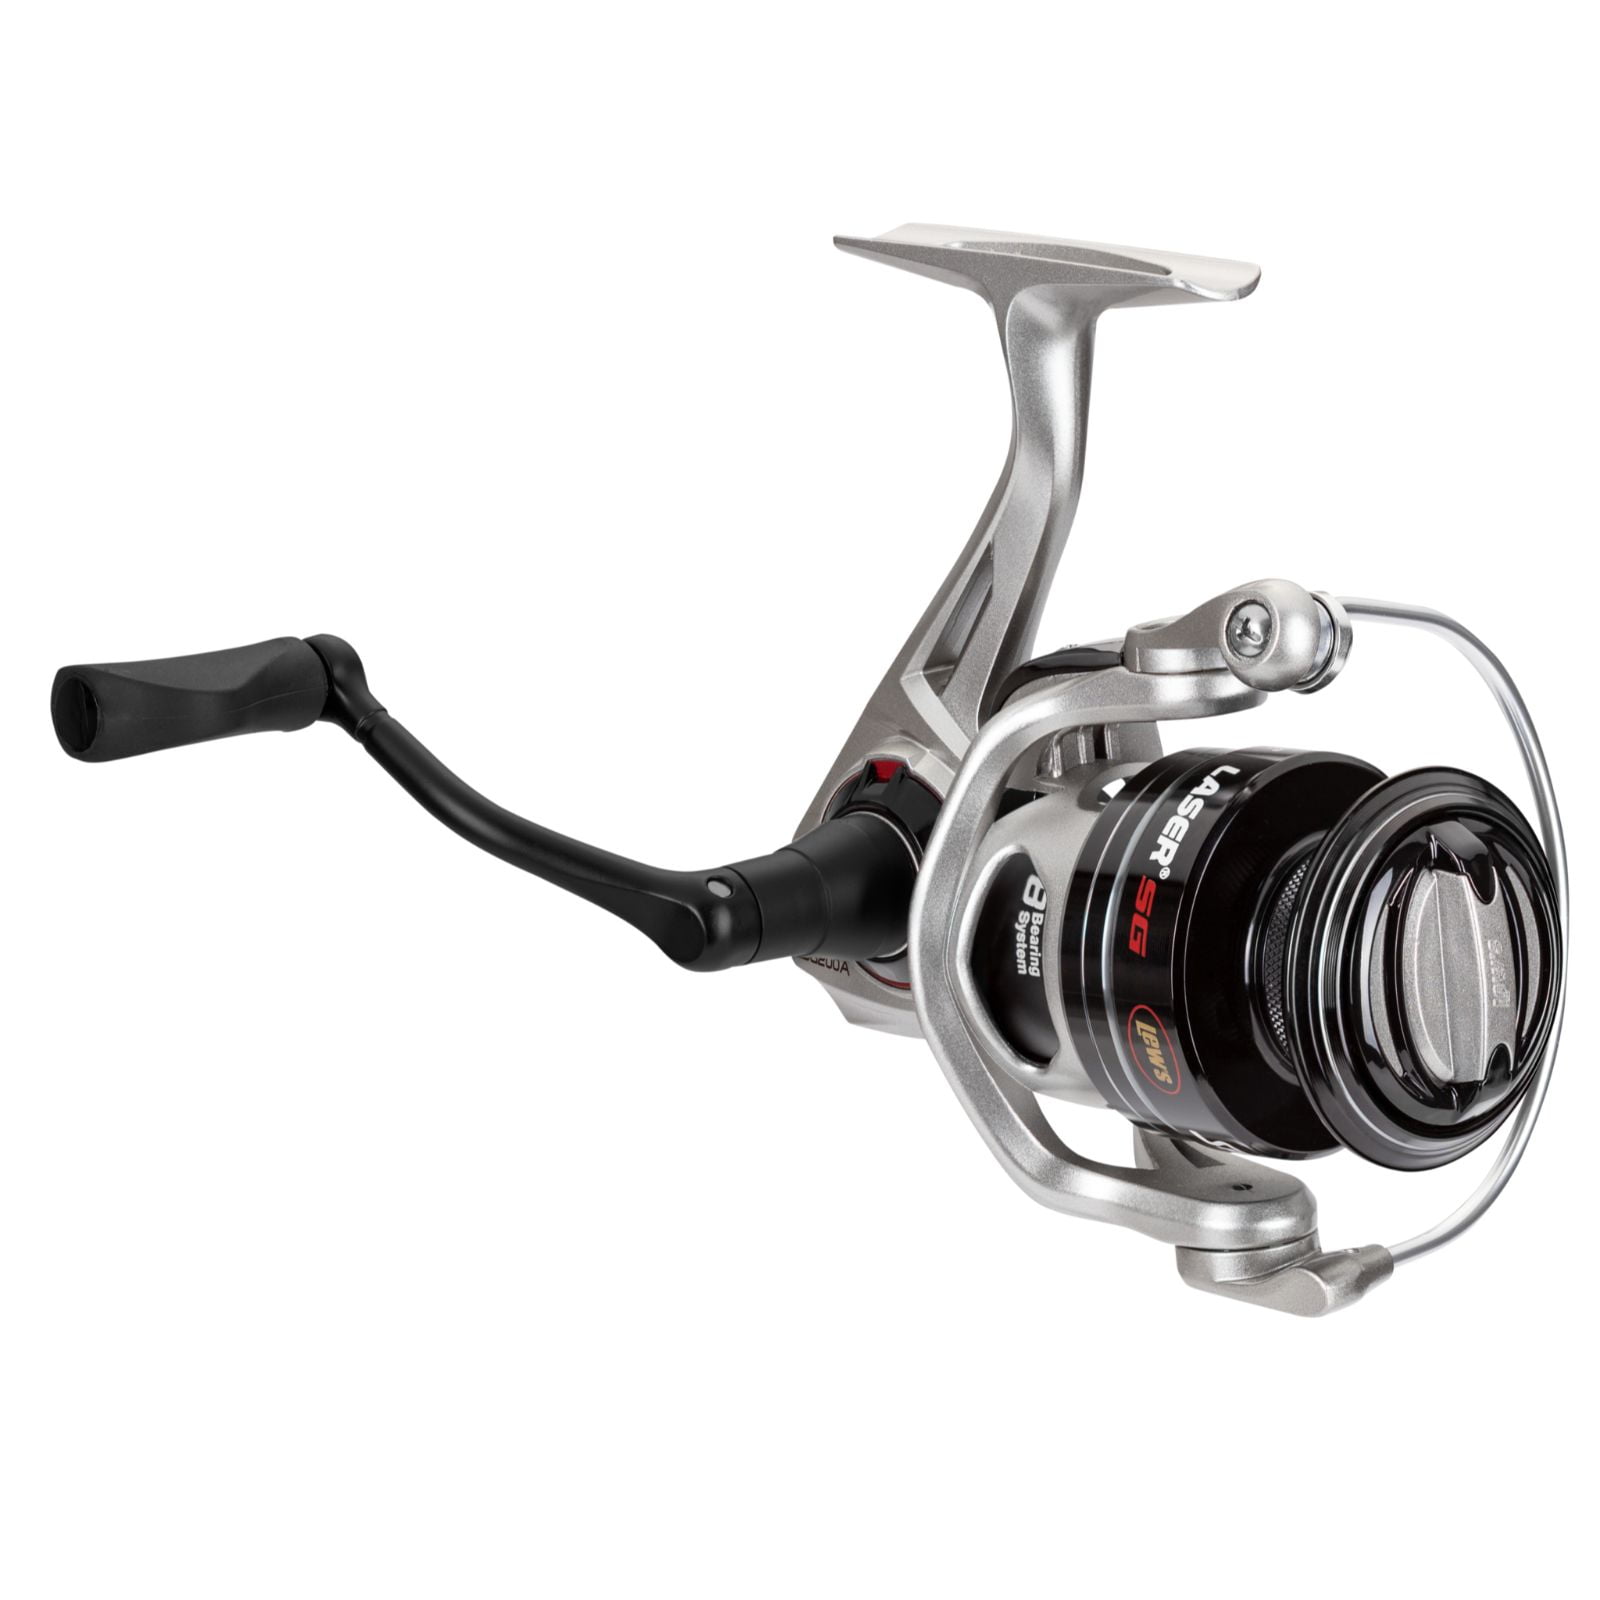 Lew's Laser SG Speed Spin Spinning Fishing Reel, Size 200 Reel, Silver 